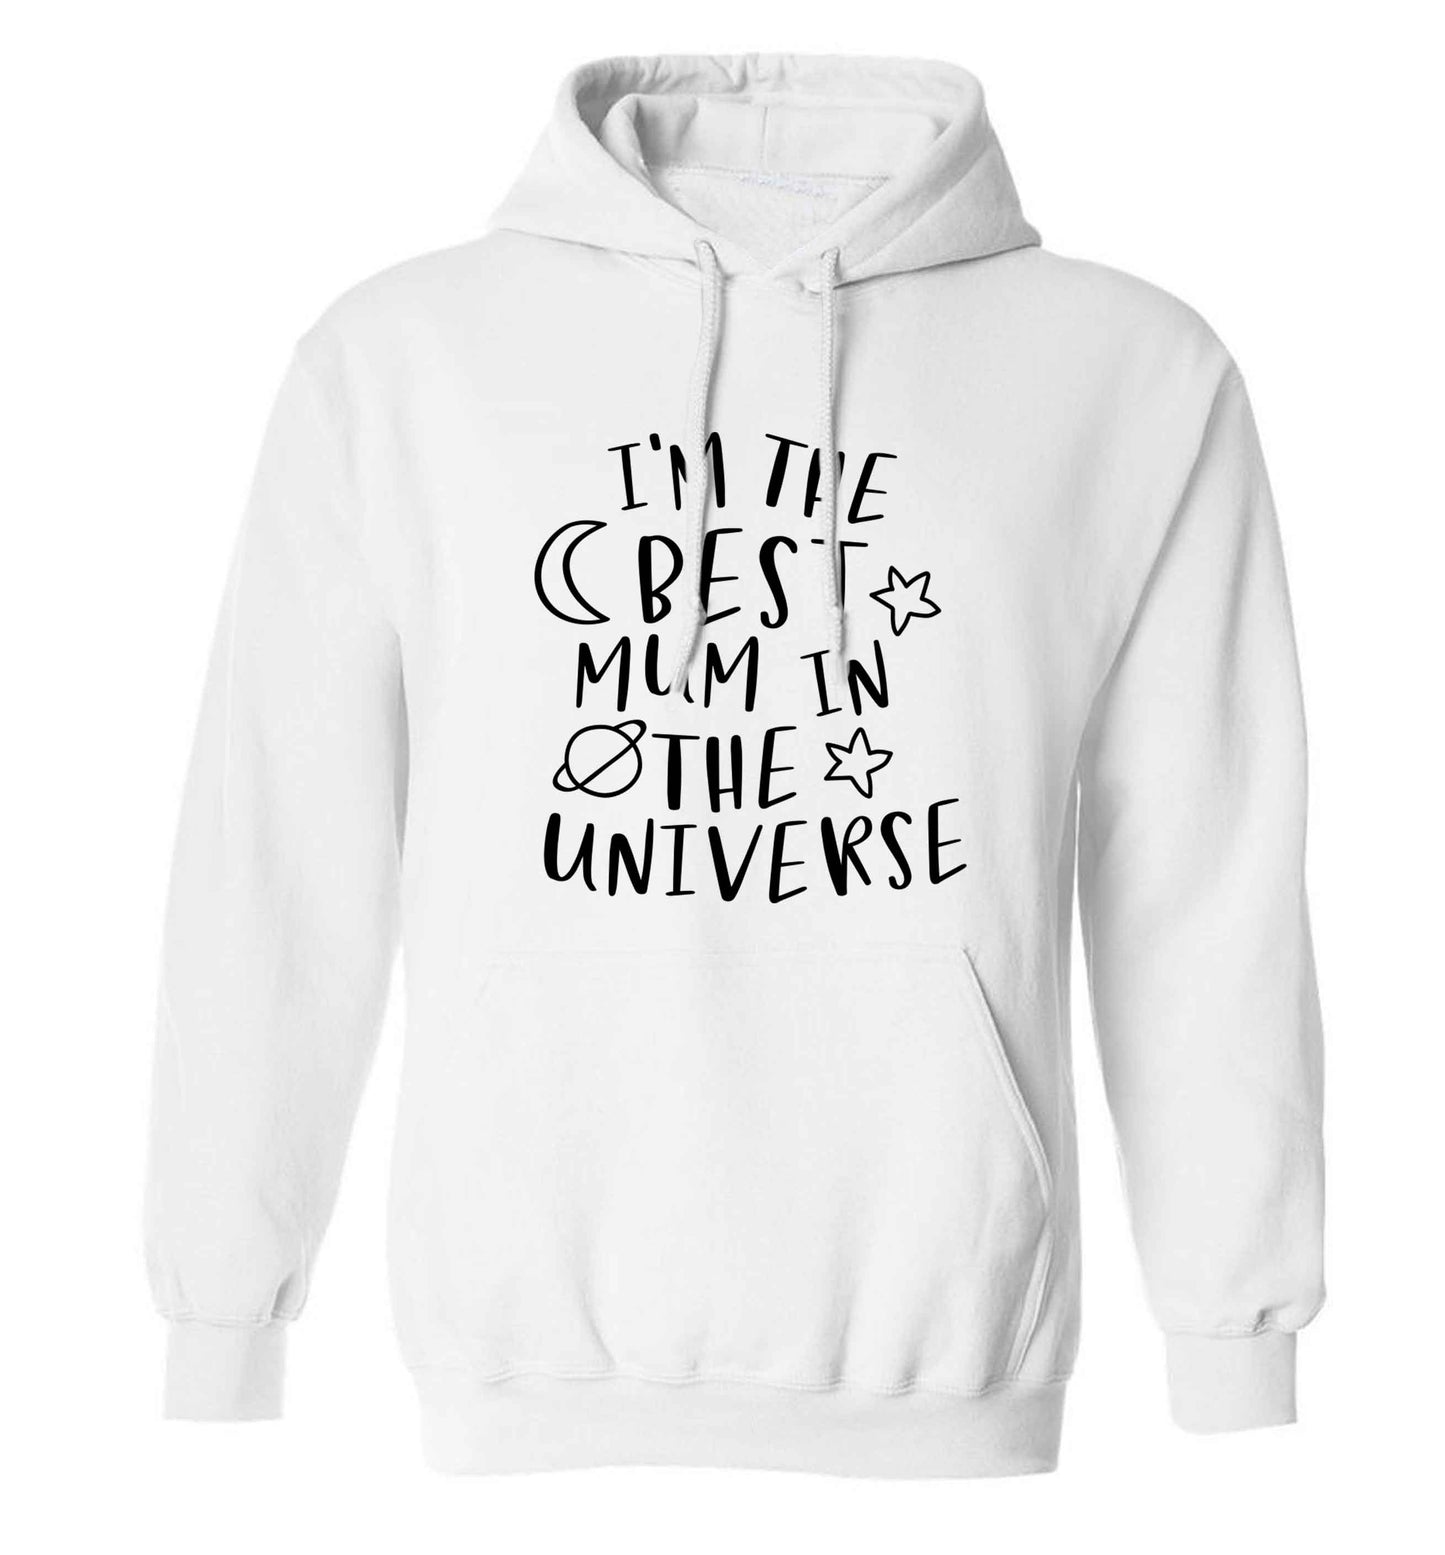 I'm the best mum in the universe adults unisex white hoodie 2XL